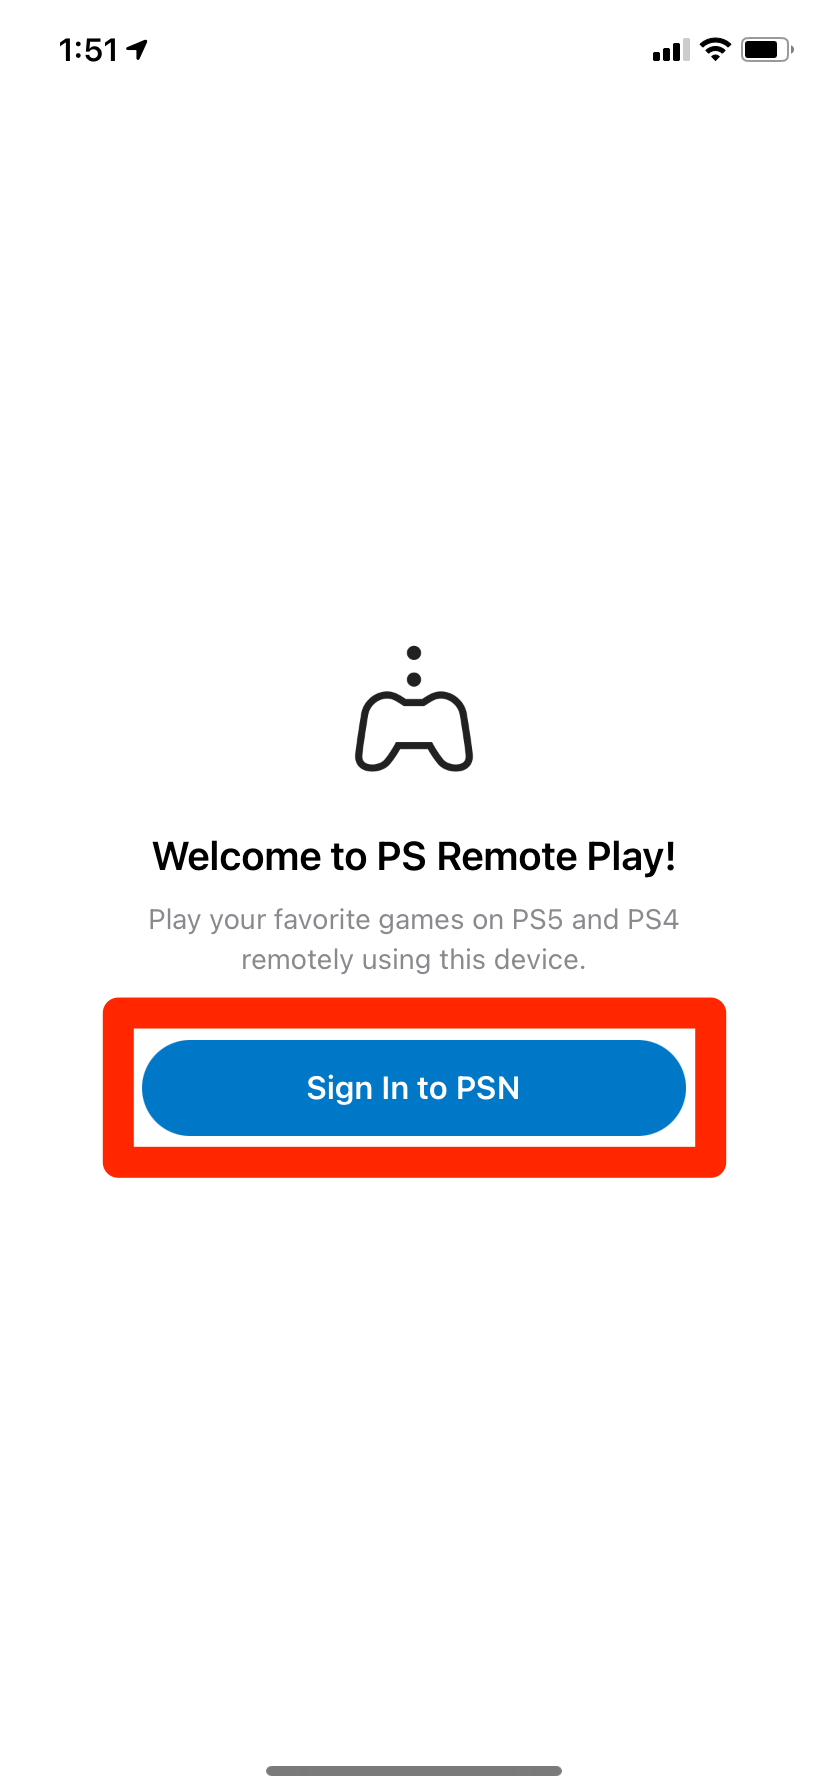 A white screen that says "Welcome to PS Remote Play!" A blue icon reading "Sign In to PSN" is highlighted.